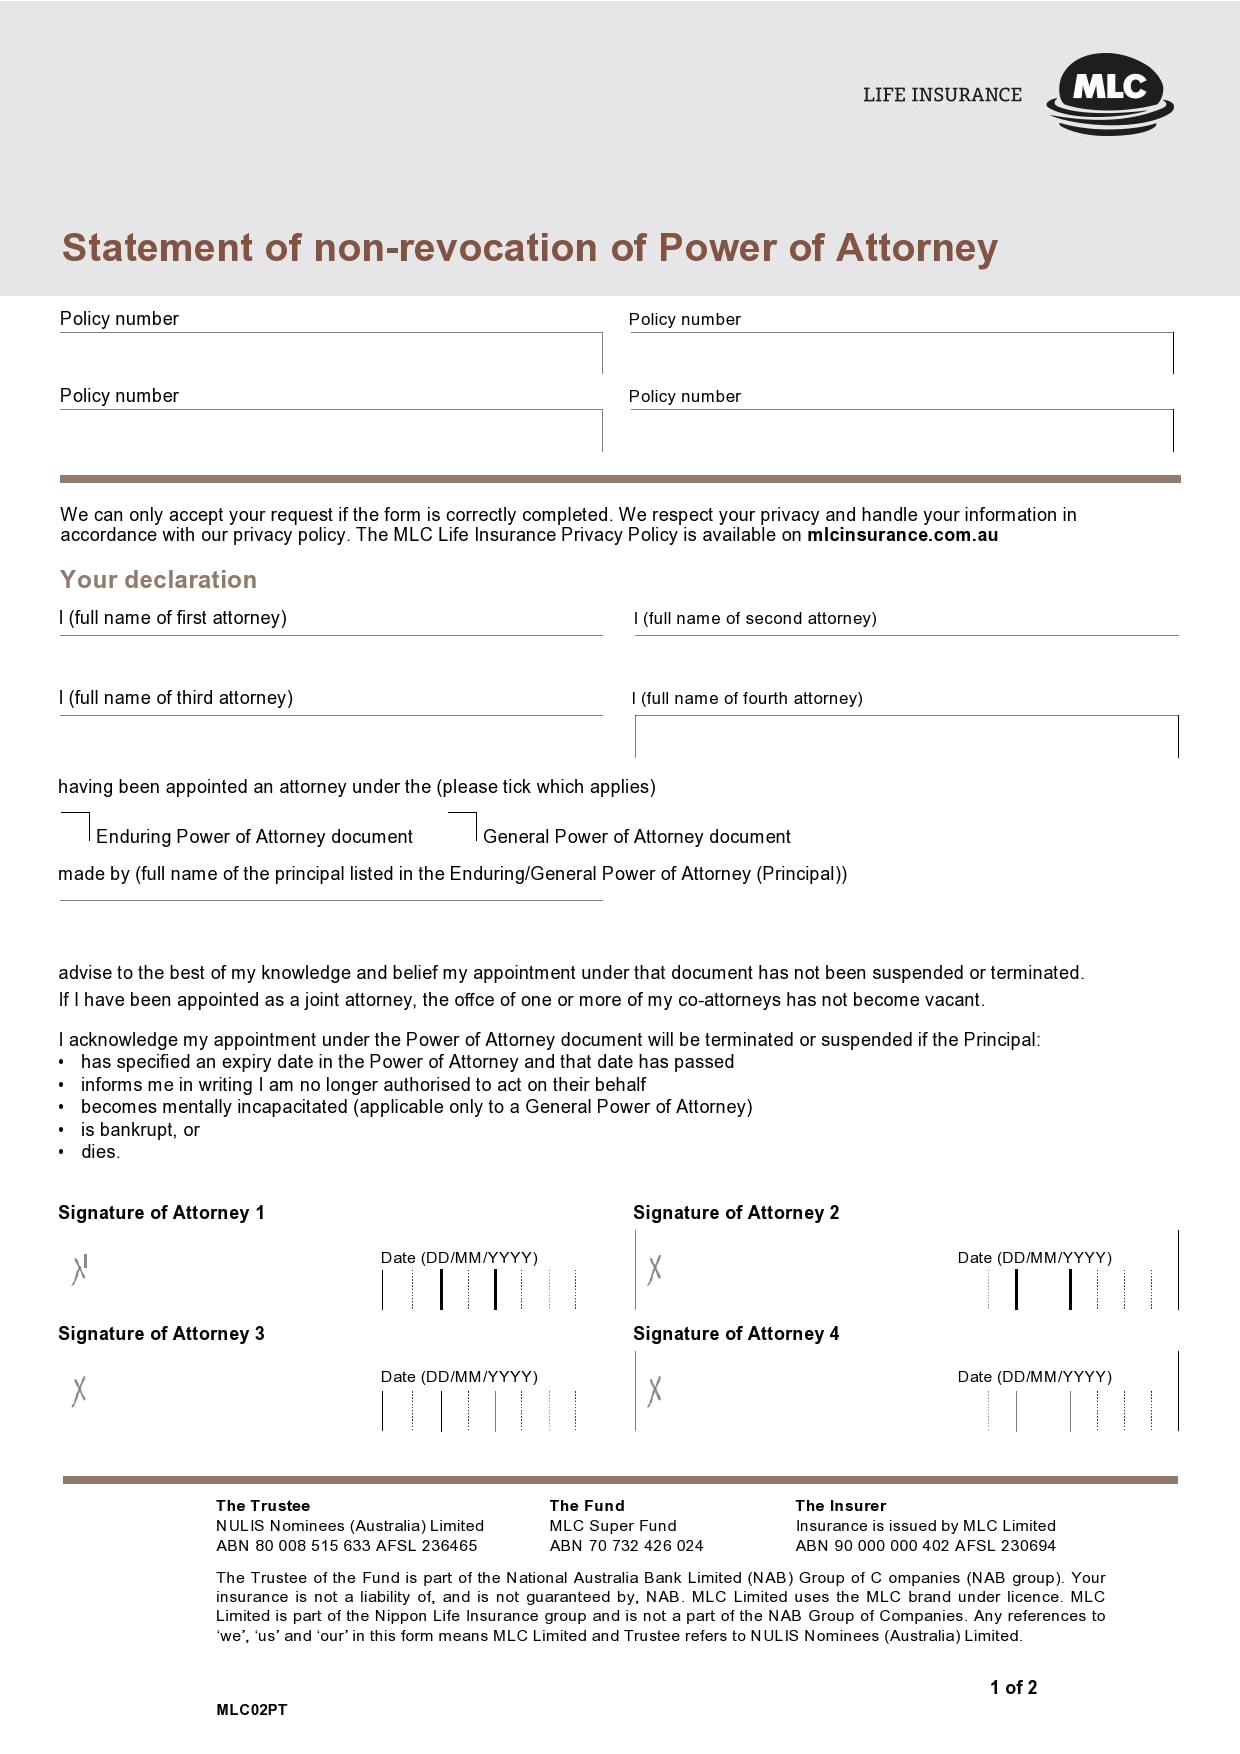 30 Free Power of Attorney Revocation Forms (Word/PDF) TemplateArchive